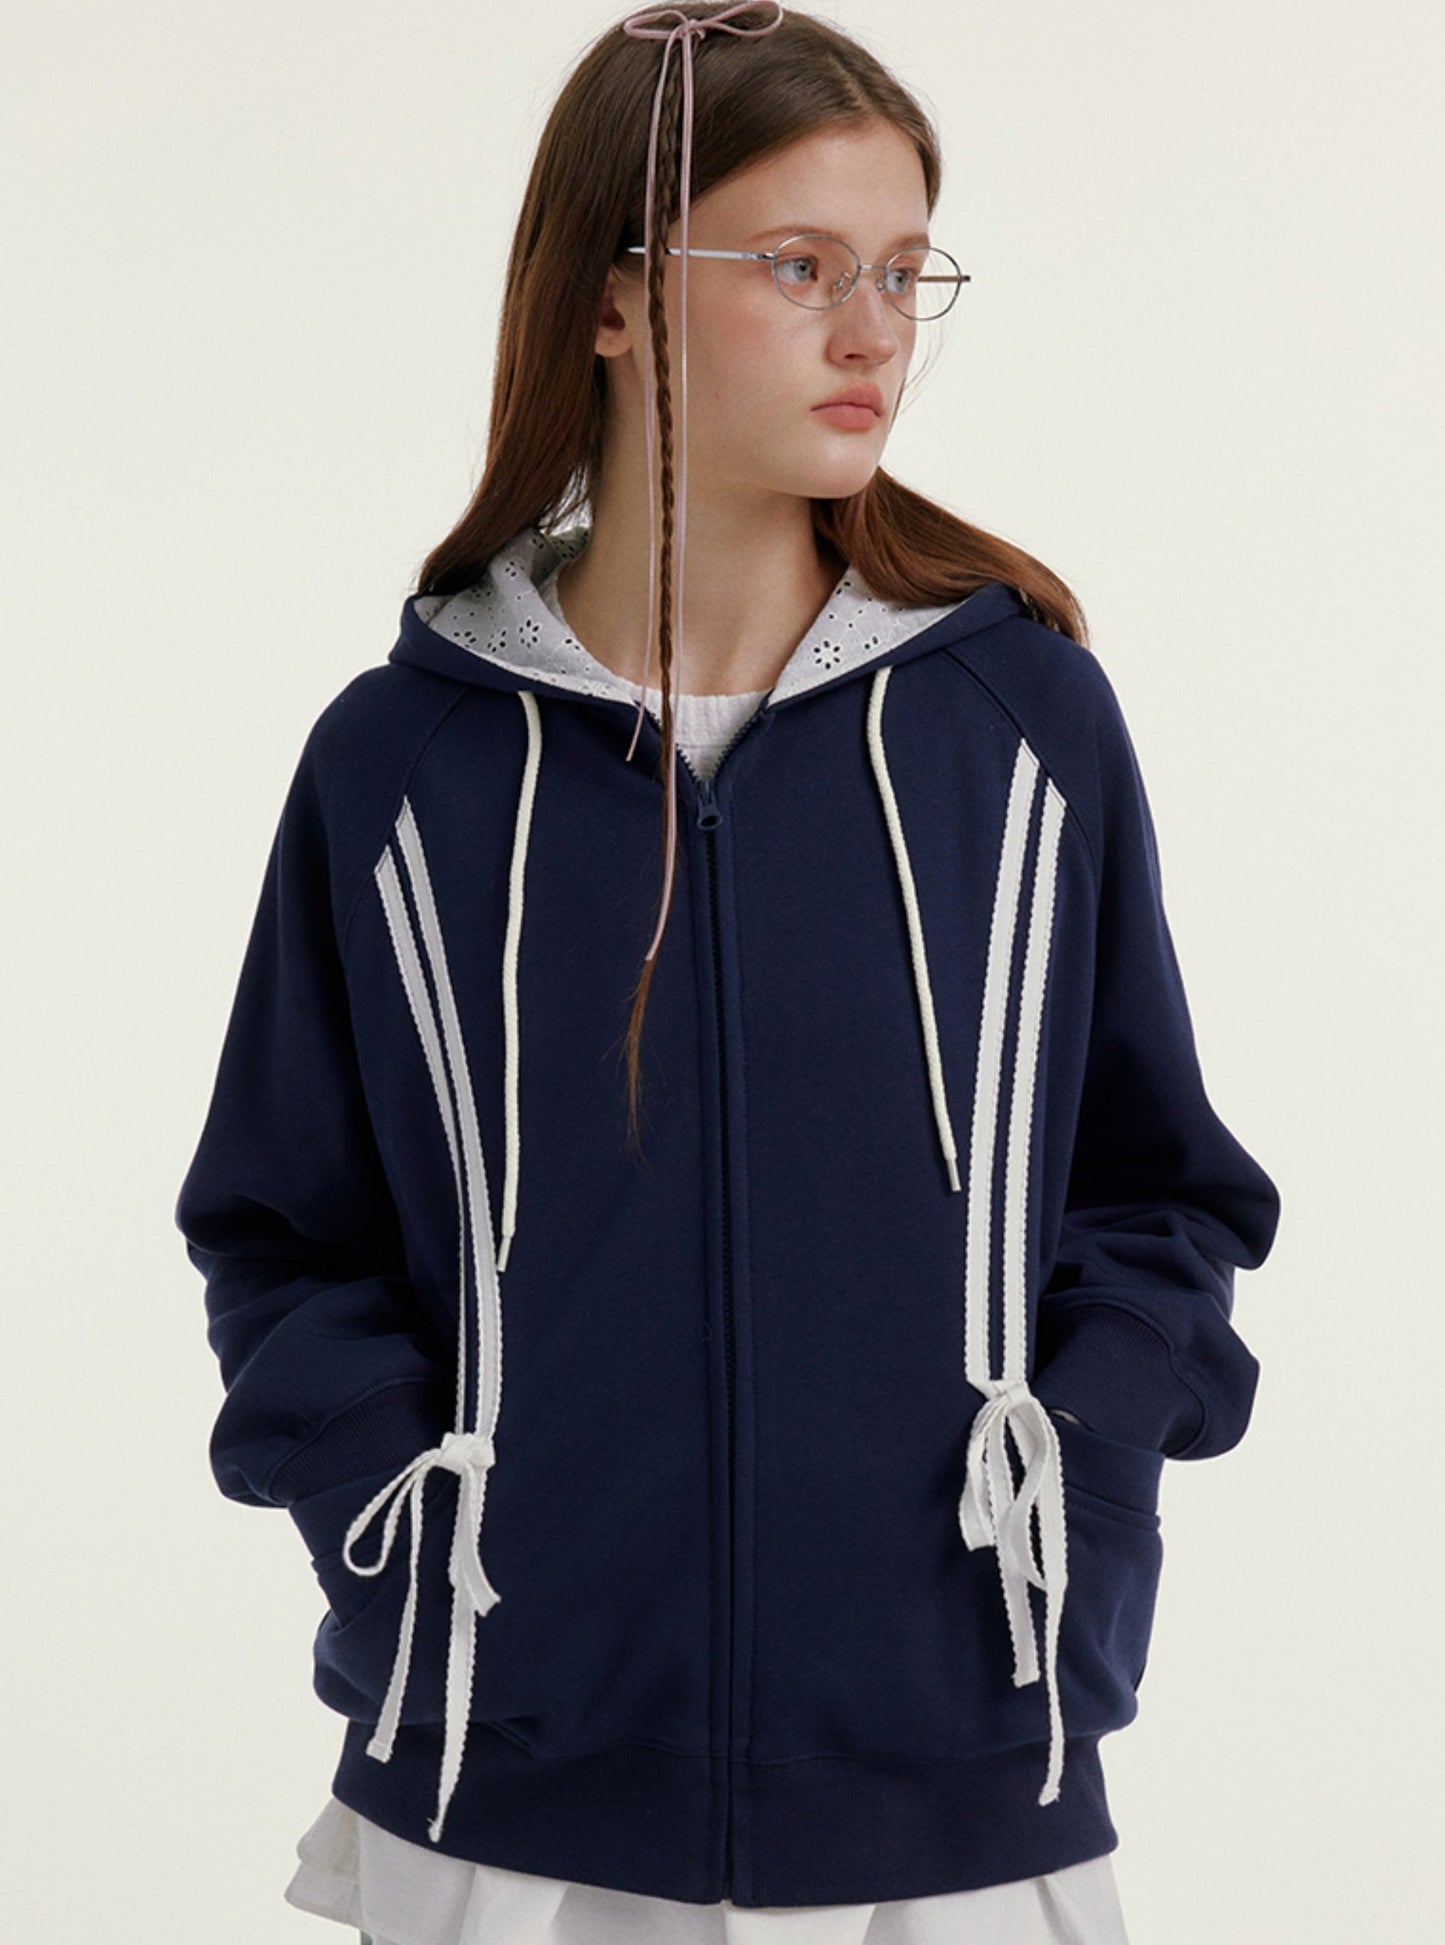 Embroidered Bow Hooded Knit Jacket